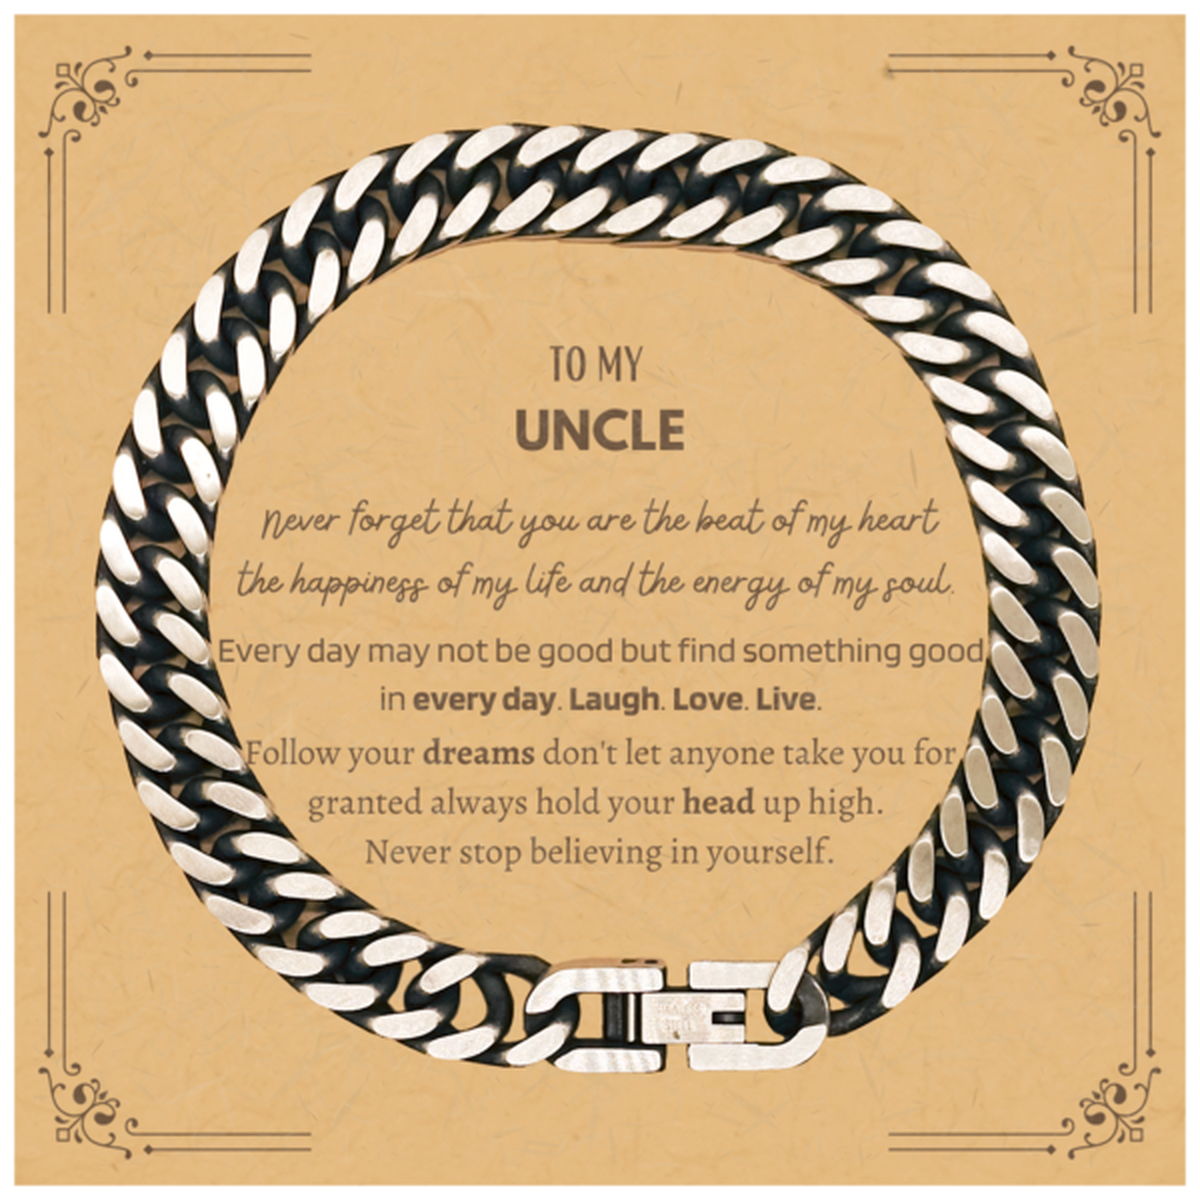 To My Uncle Message Card Gifts, Christmas Uncle Cuban Link Chain Bracelet Present, Birthday Unique Motivational For Uncle, To My Uncle Never forget that you are the beat of my heart the happiness of my life and the energy of my soul